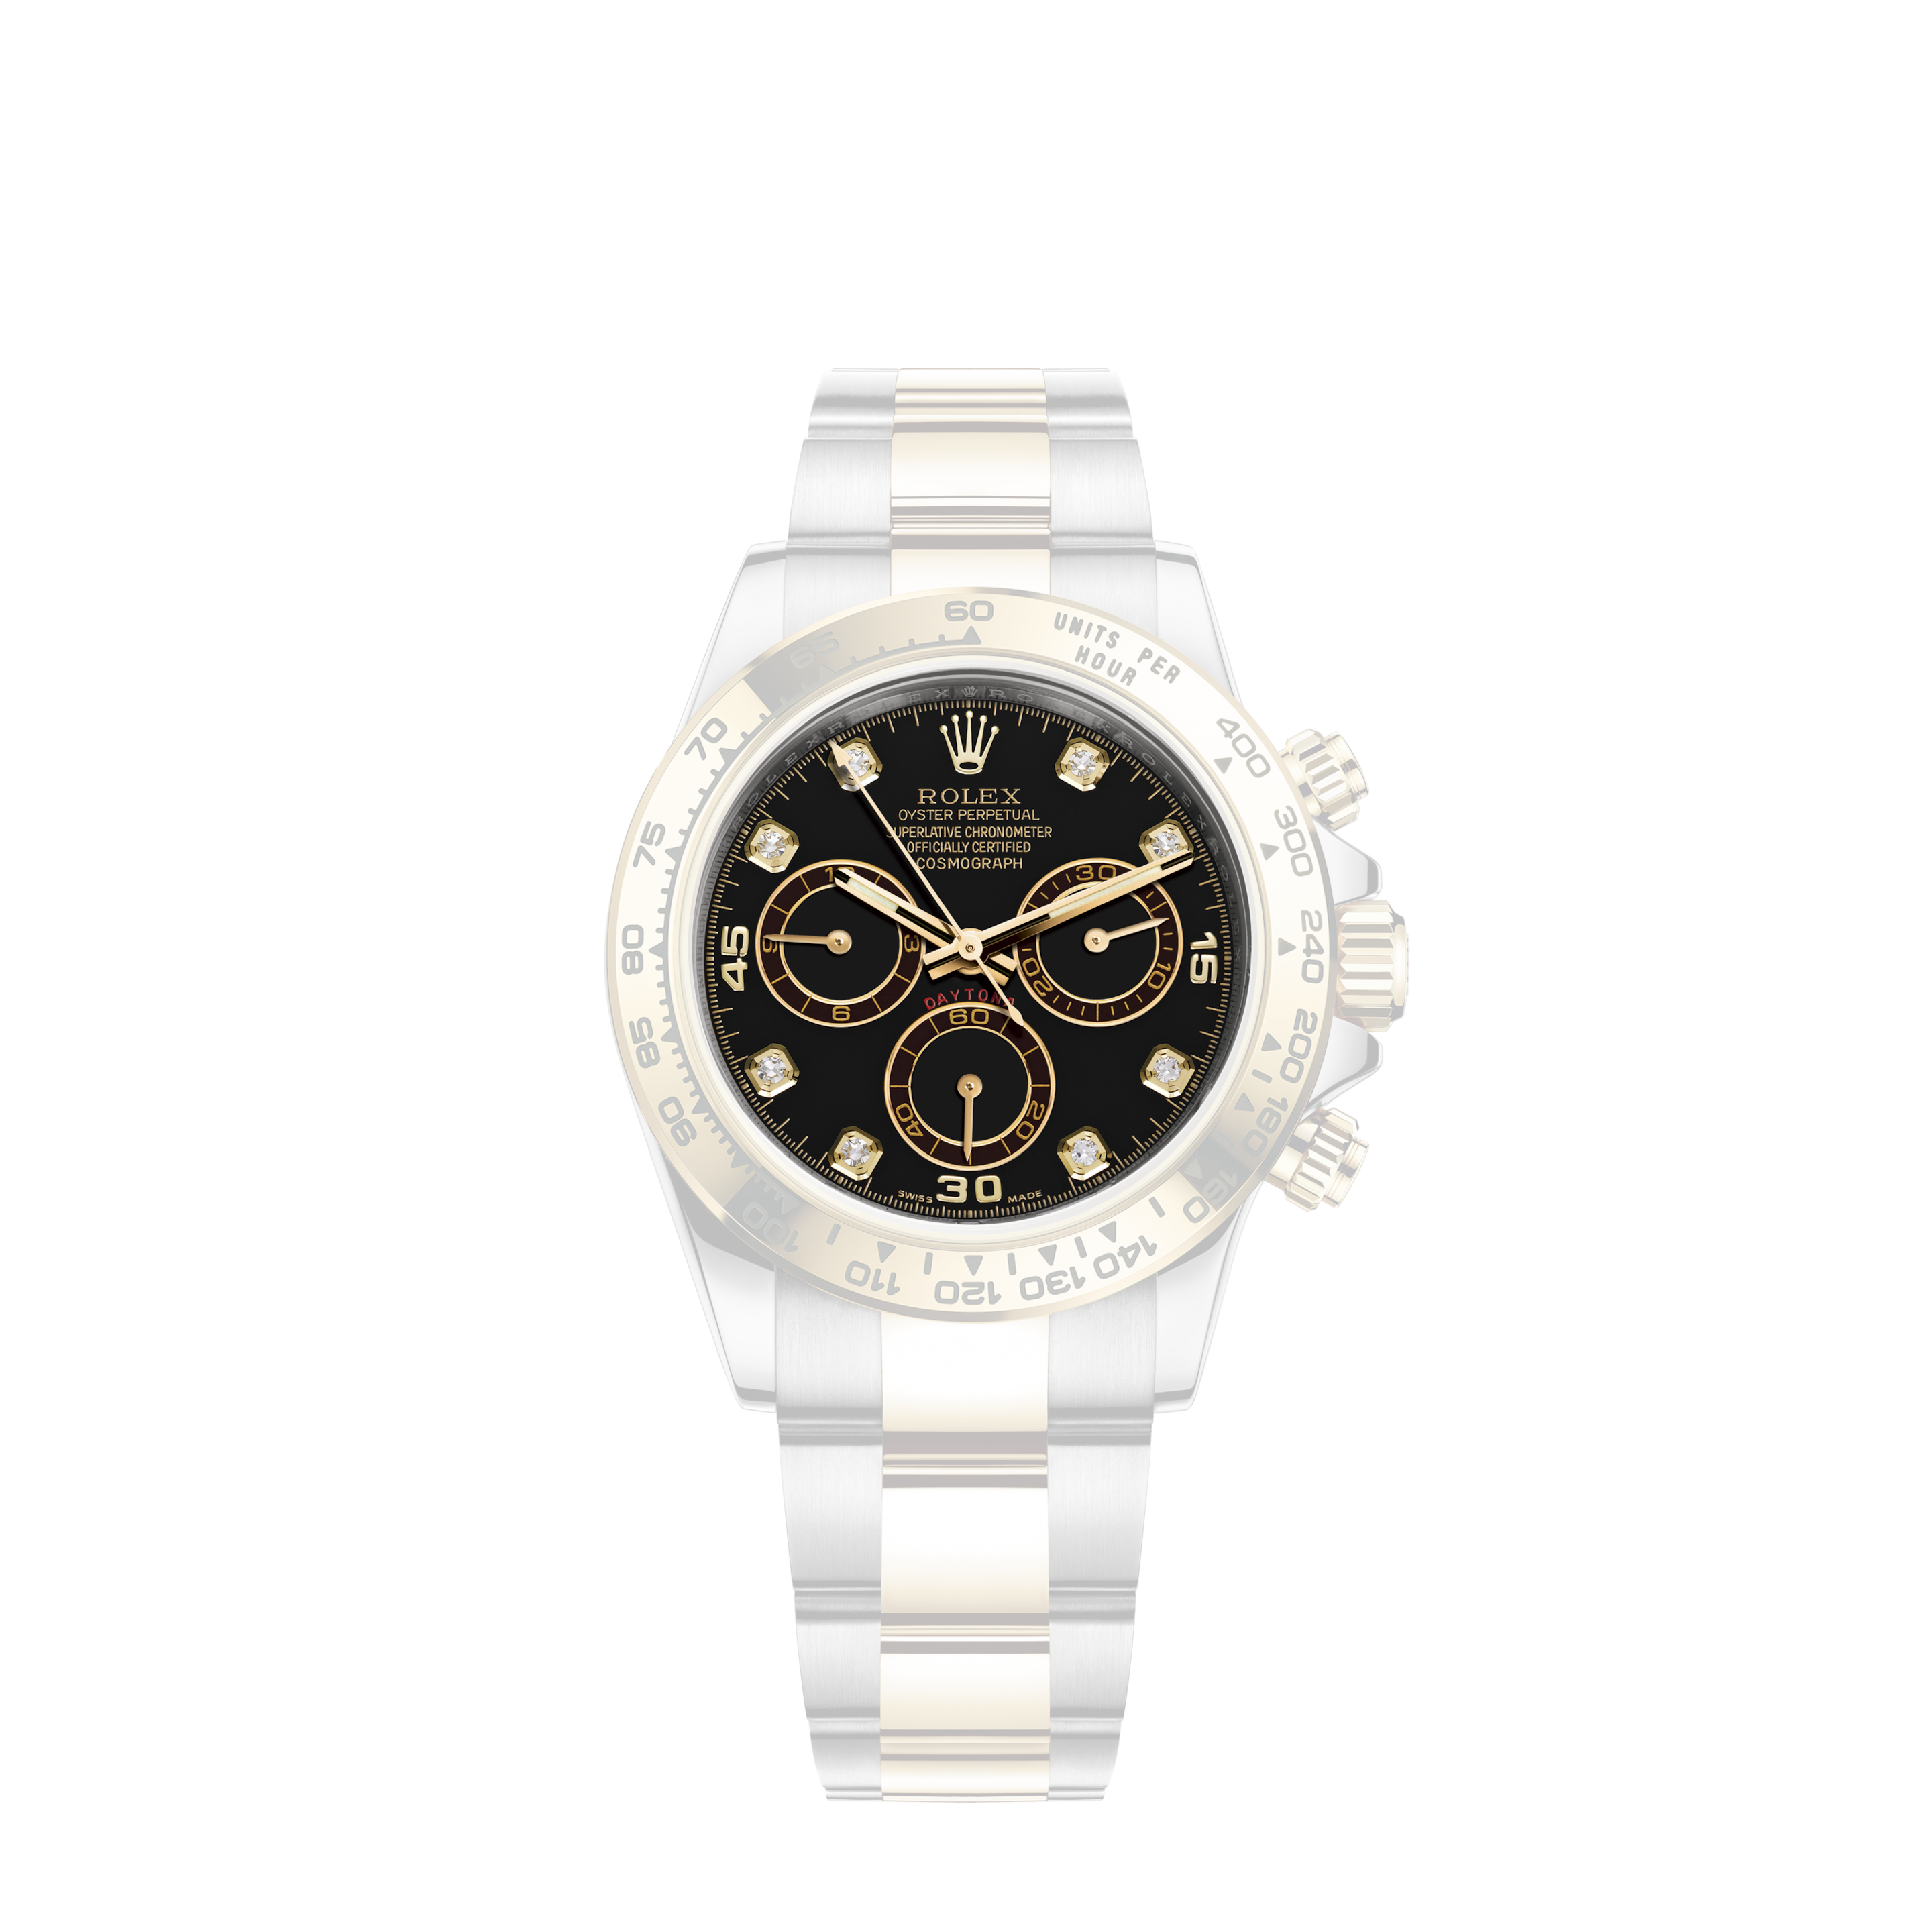 Rolex Explorer II - White Dial GMT Automatic Watch - 216570 (2016)